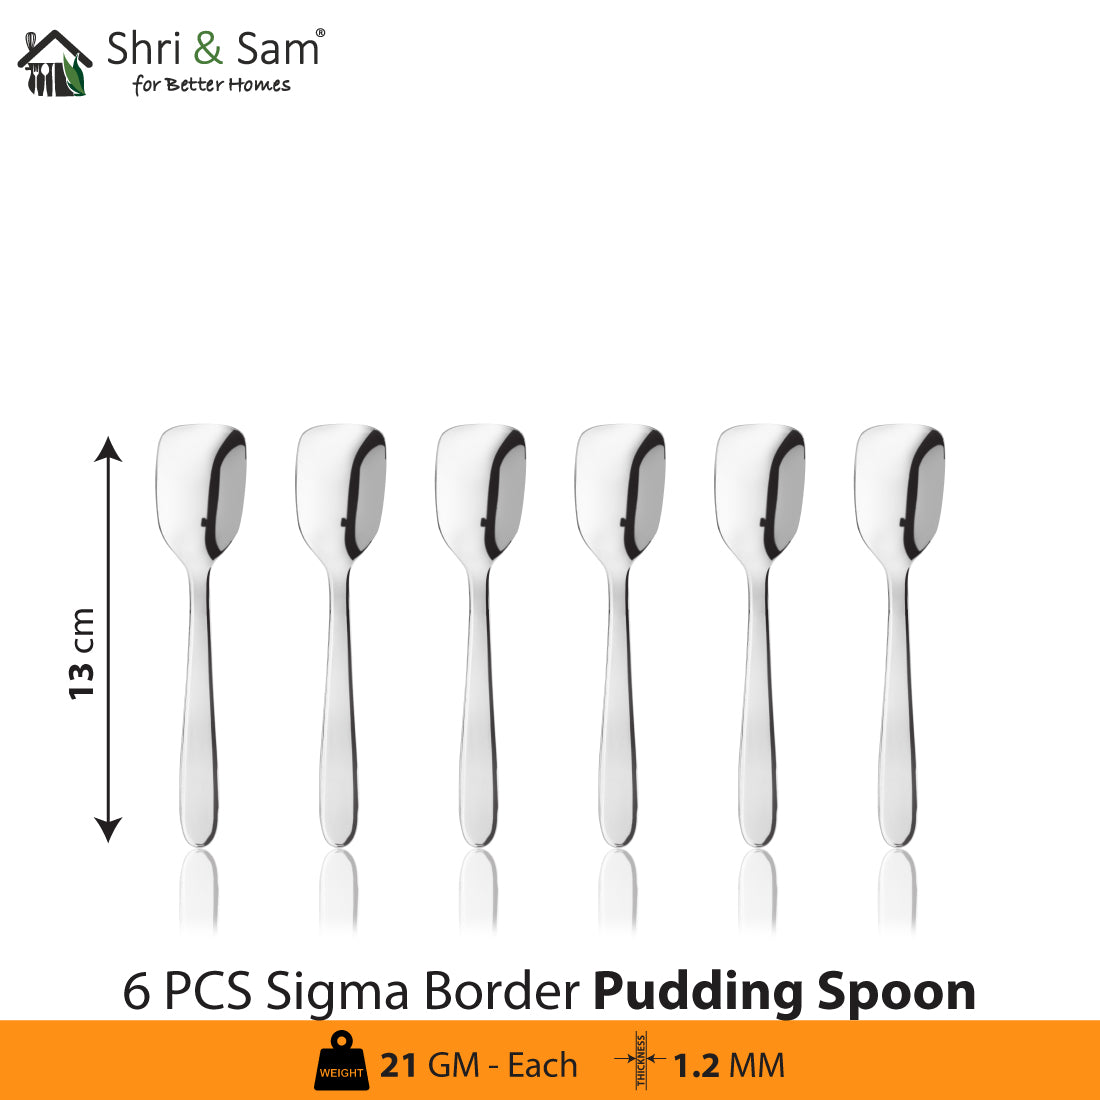 Stainless Steel 18 PCS Cutlery Set Sigma Border